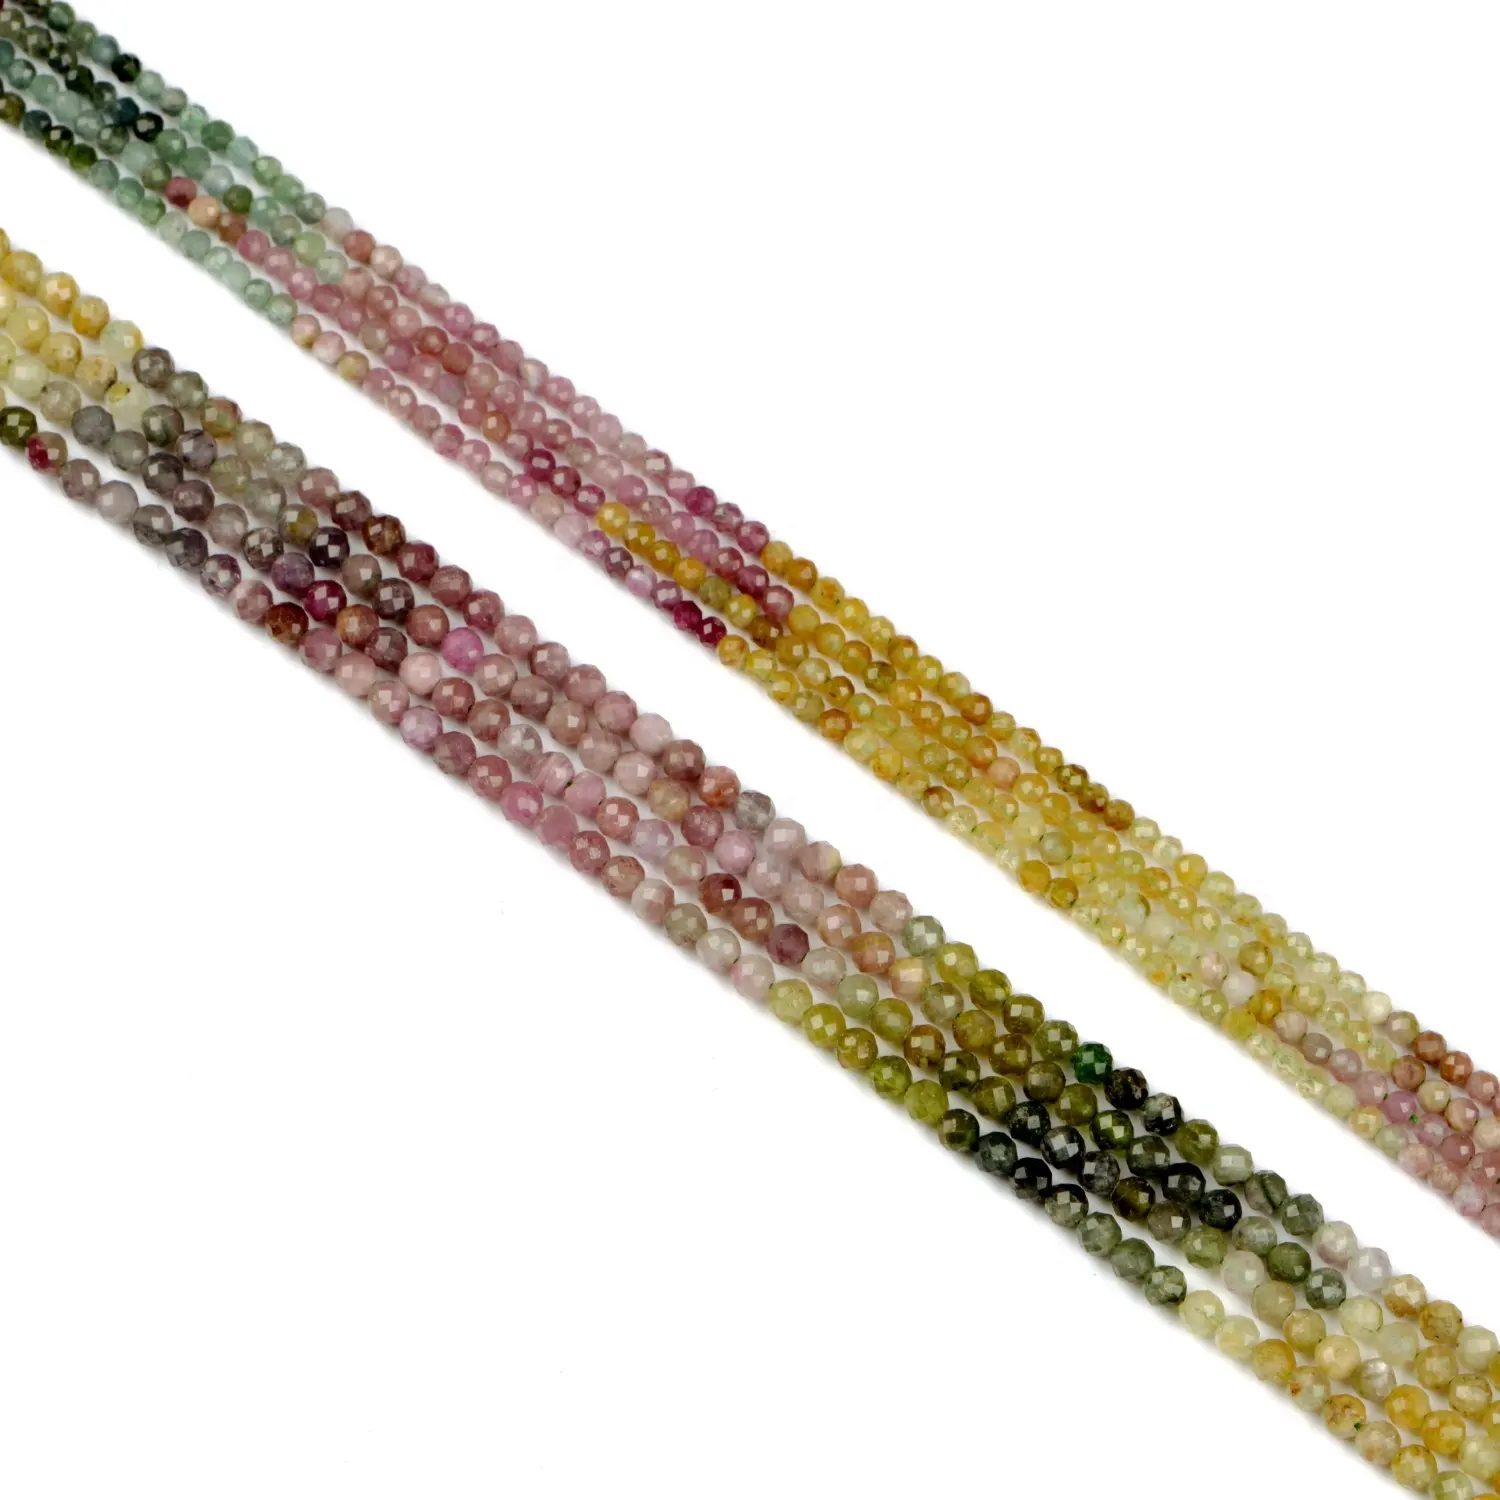 Gradient Ramp Tourmaline Hard Cutting Round Beads 3/4MM Wholesale Best Seller Good Price Natural Stone Inspired Loose Beads